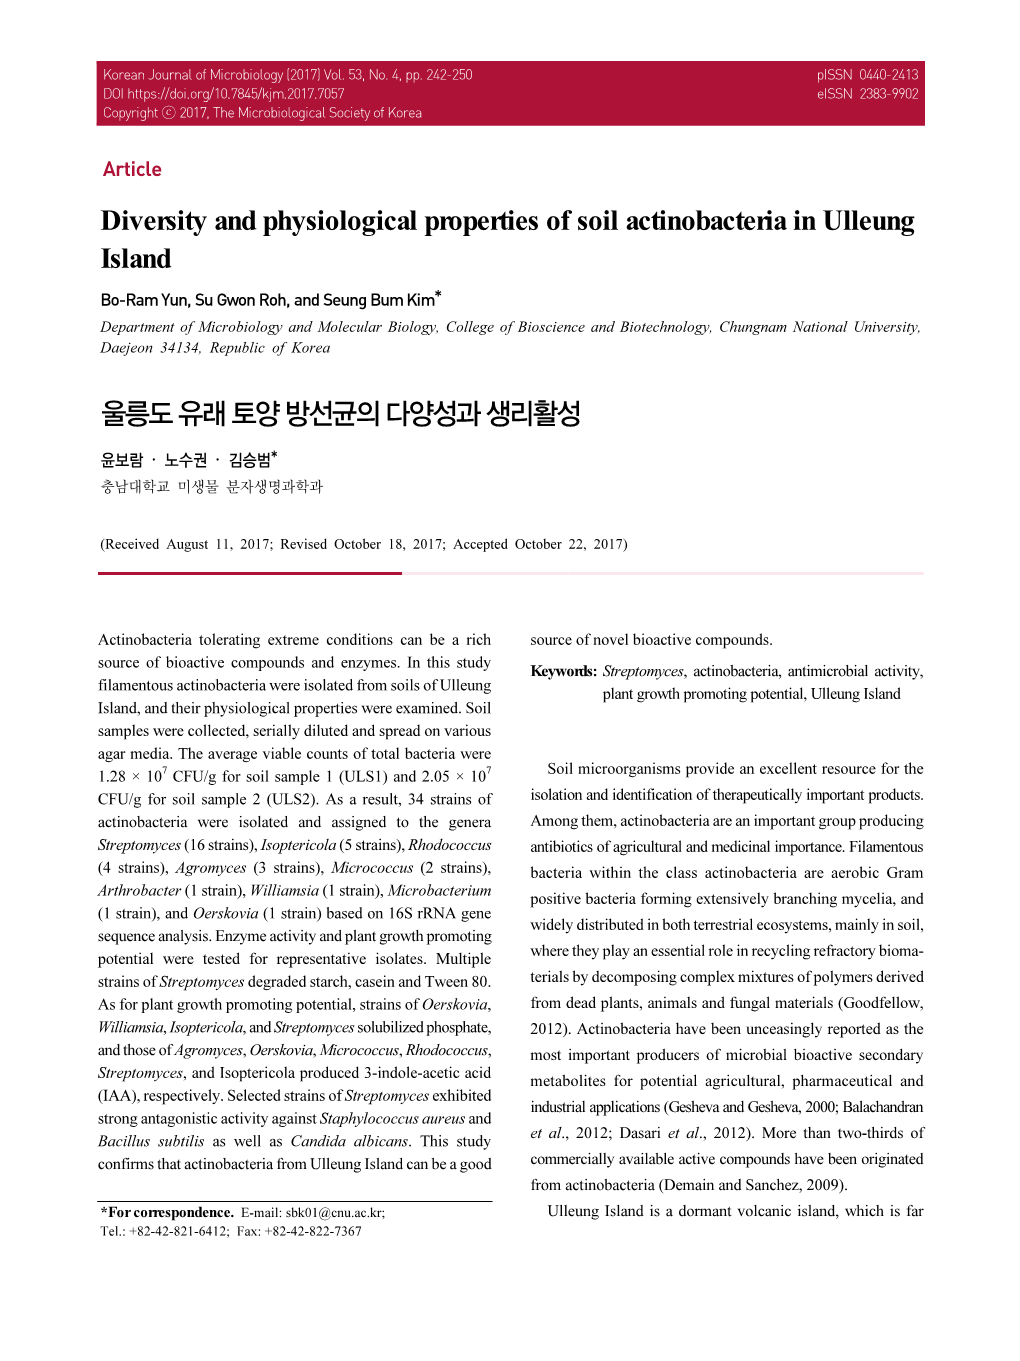 Diversity and Physiological Properties of Soil Actinobacteria in Ulleung Island